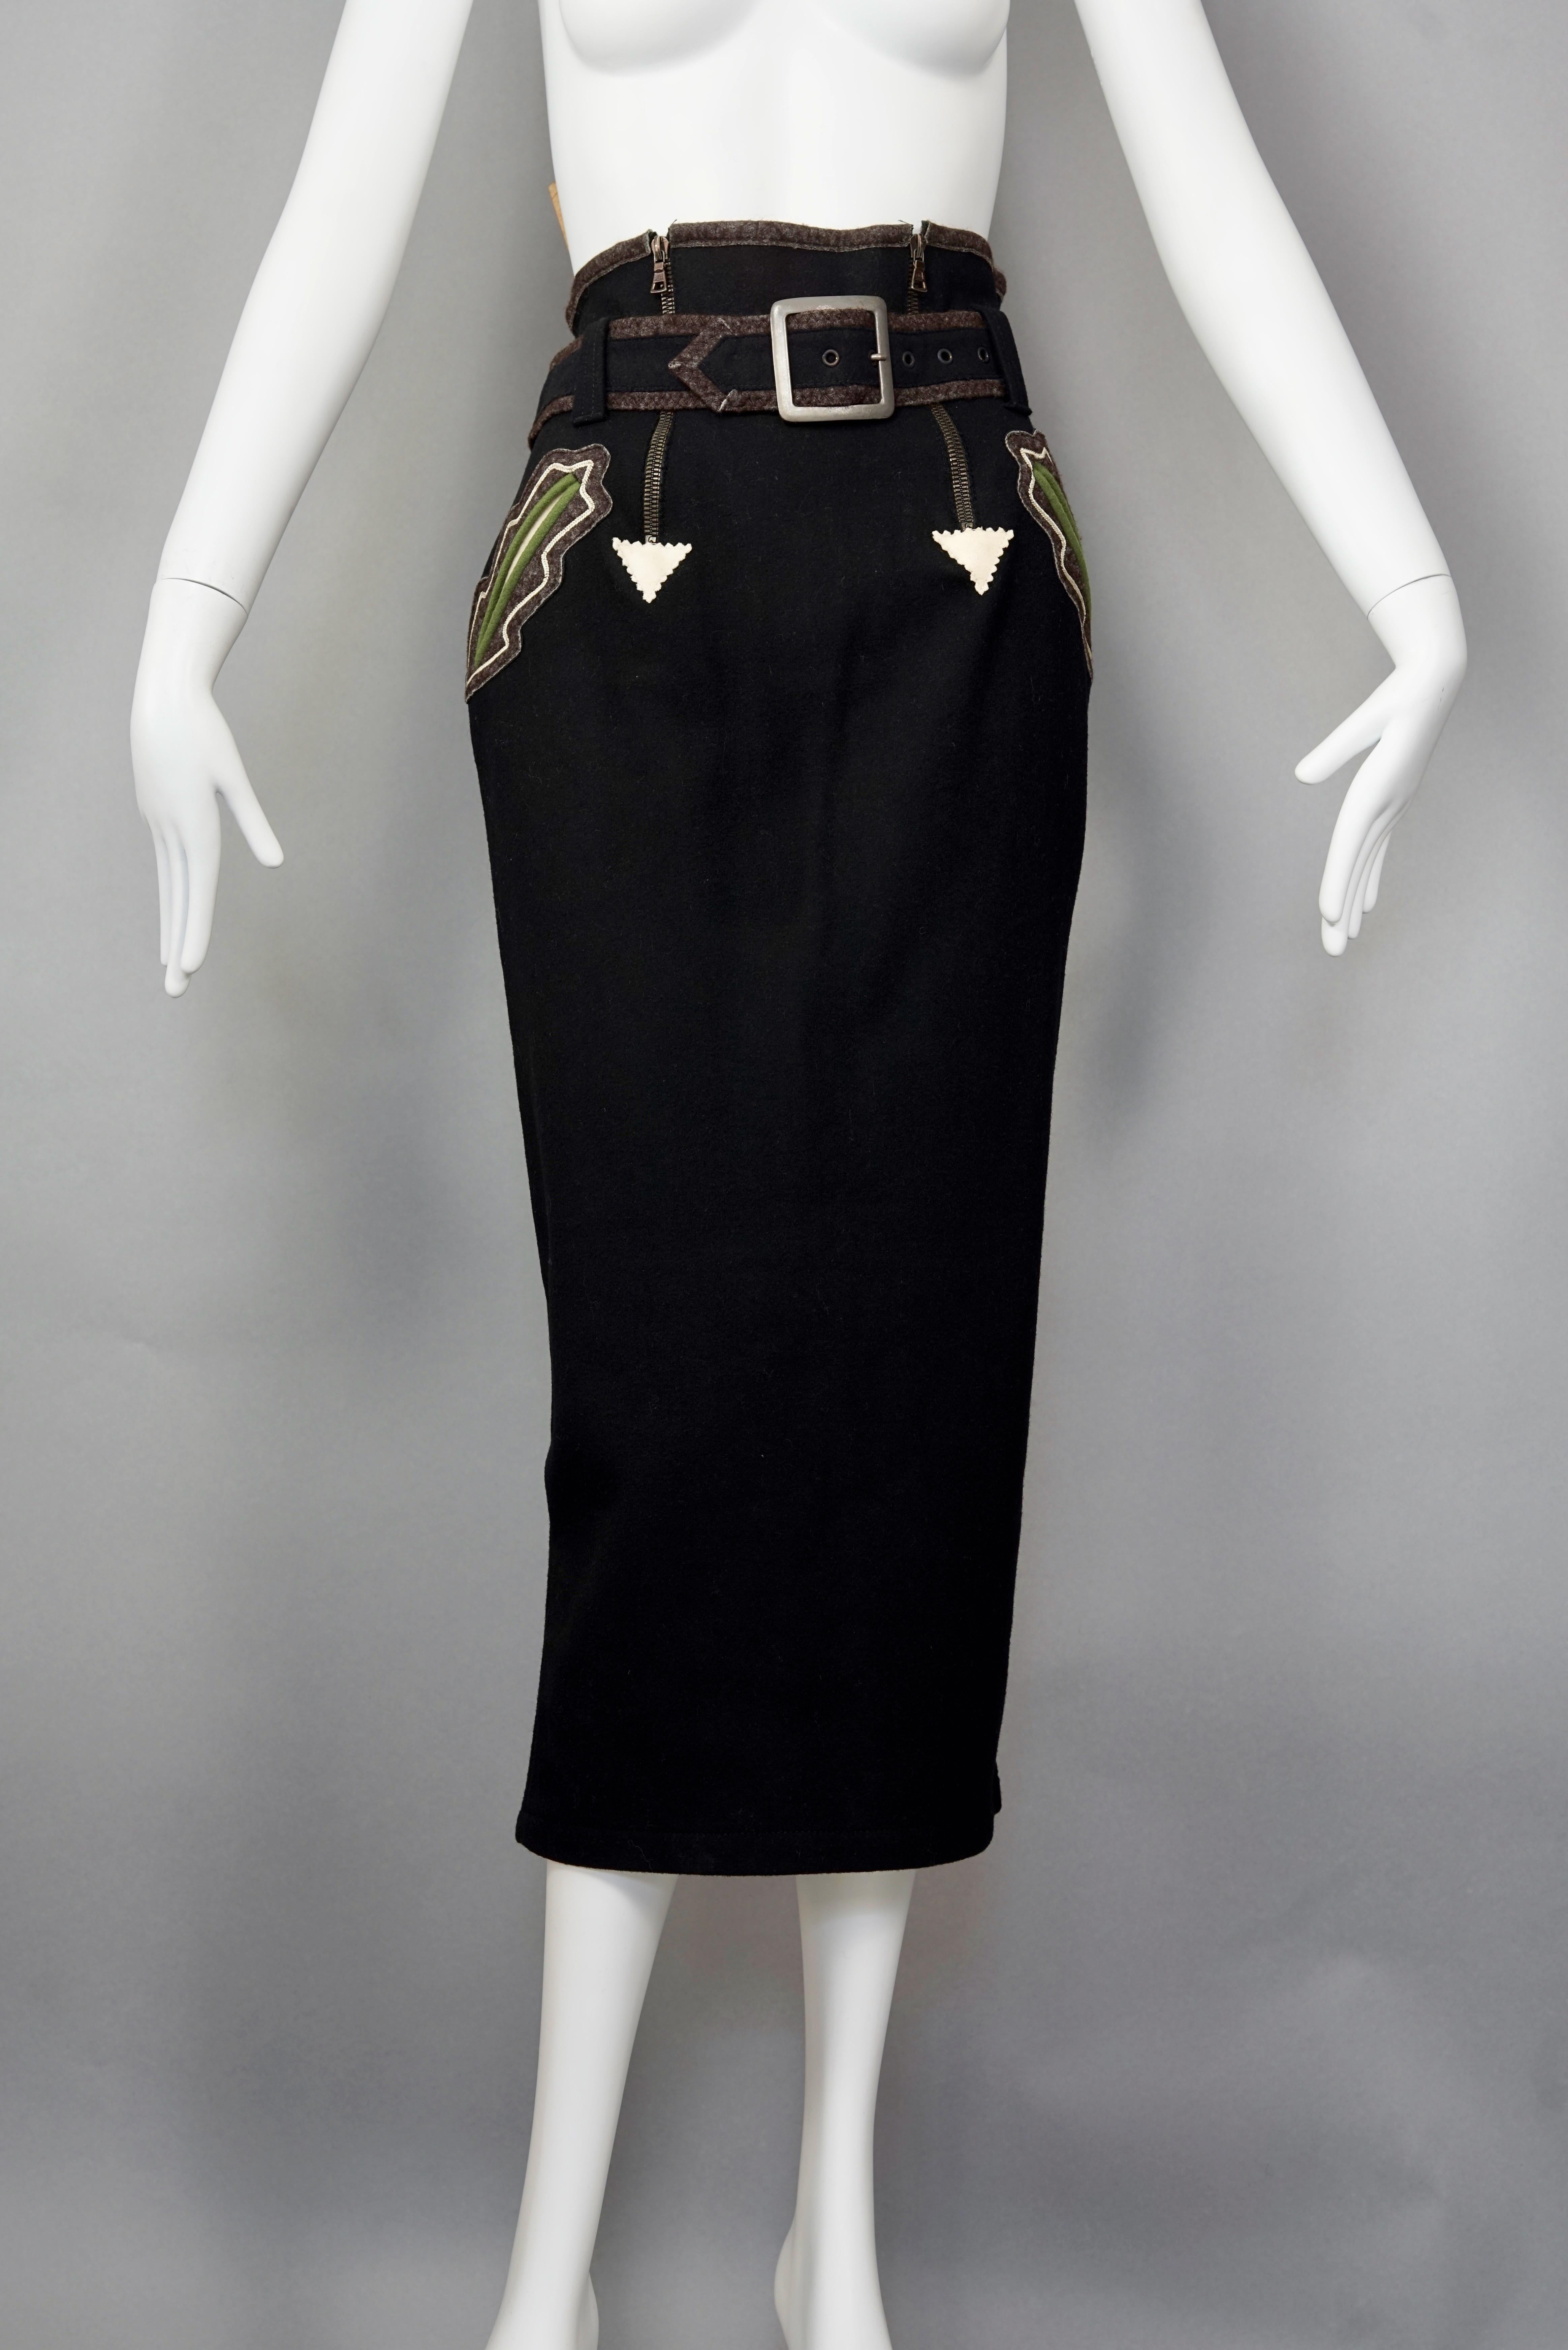 Vintage 1988 JEAN PAUL GAULTIER High Waist Belted Skirt In Excellent Condition For Sale In Kingersheim, Alsace